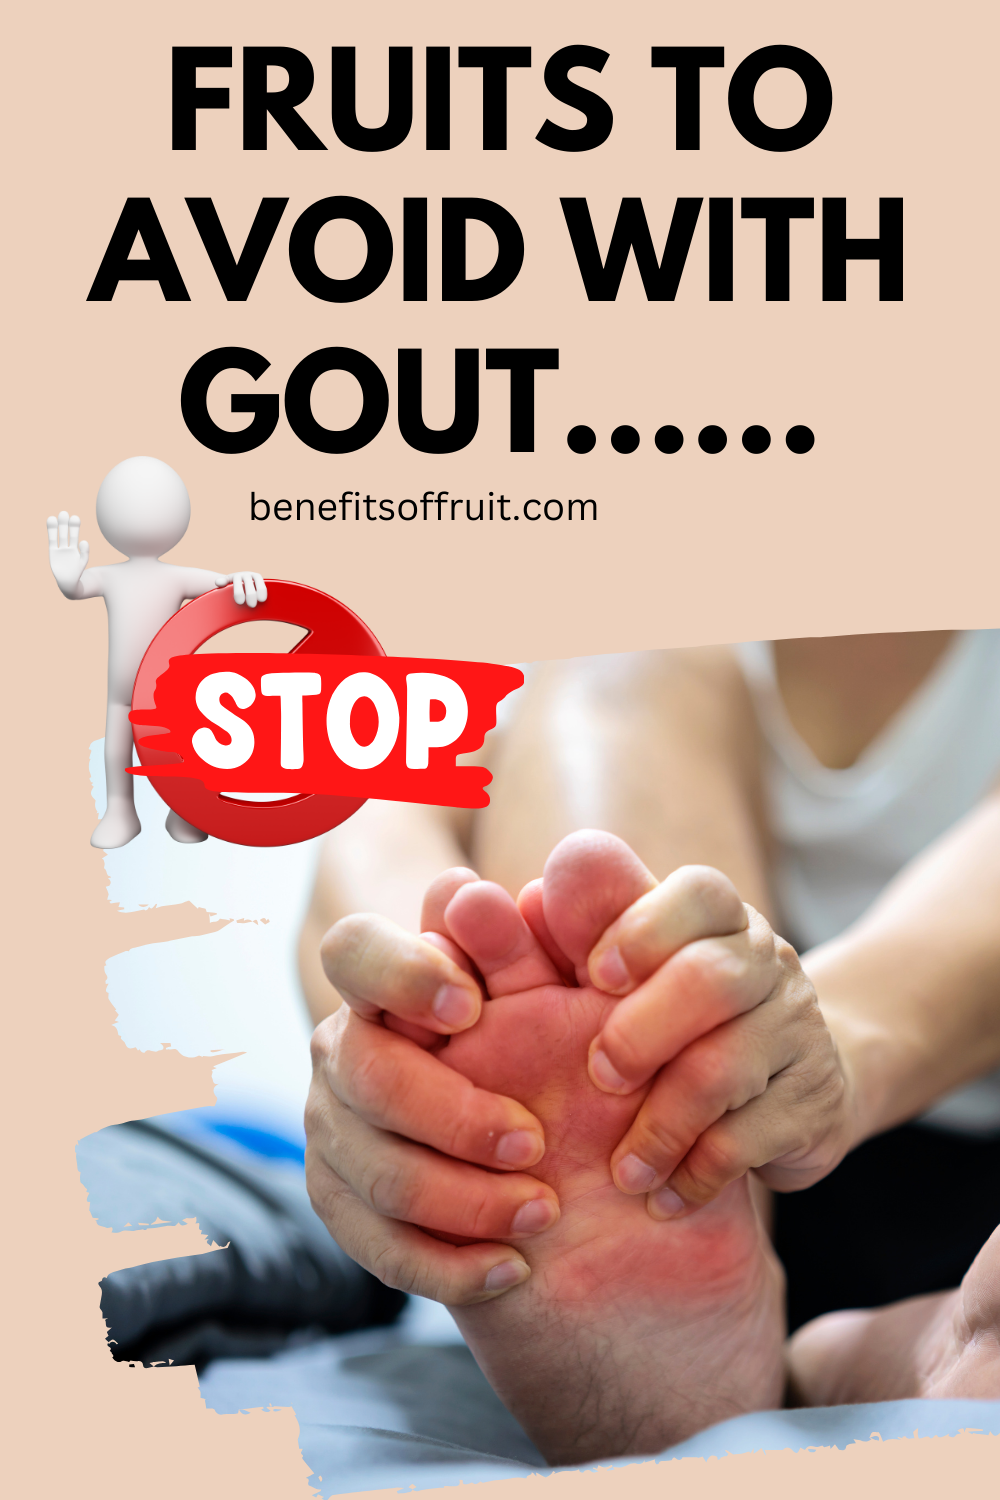 Fruits to Avoid with Gout